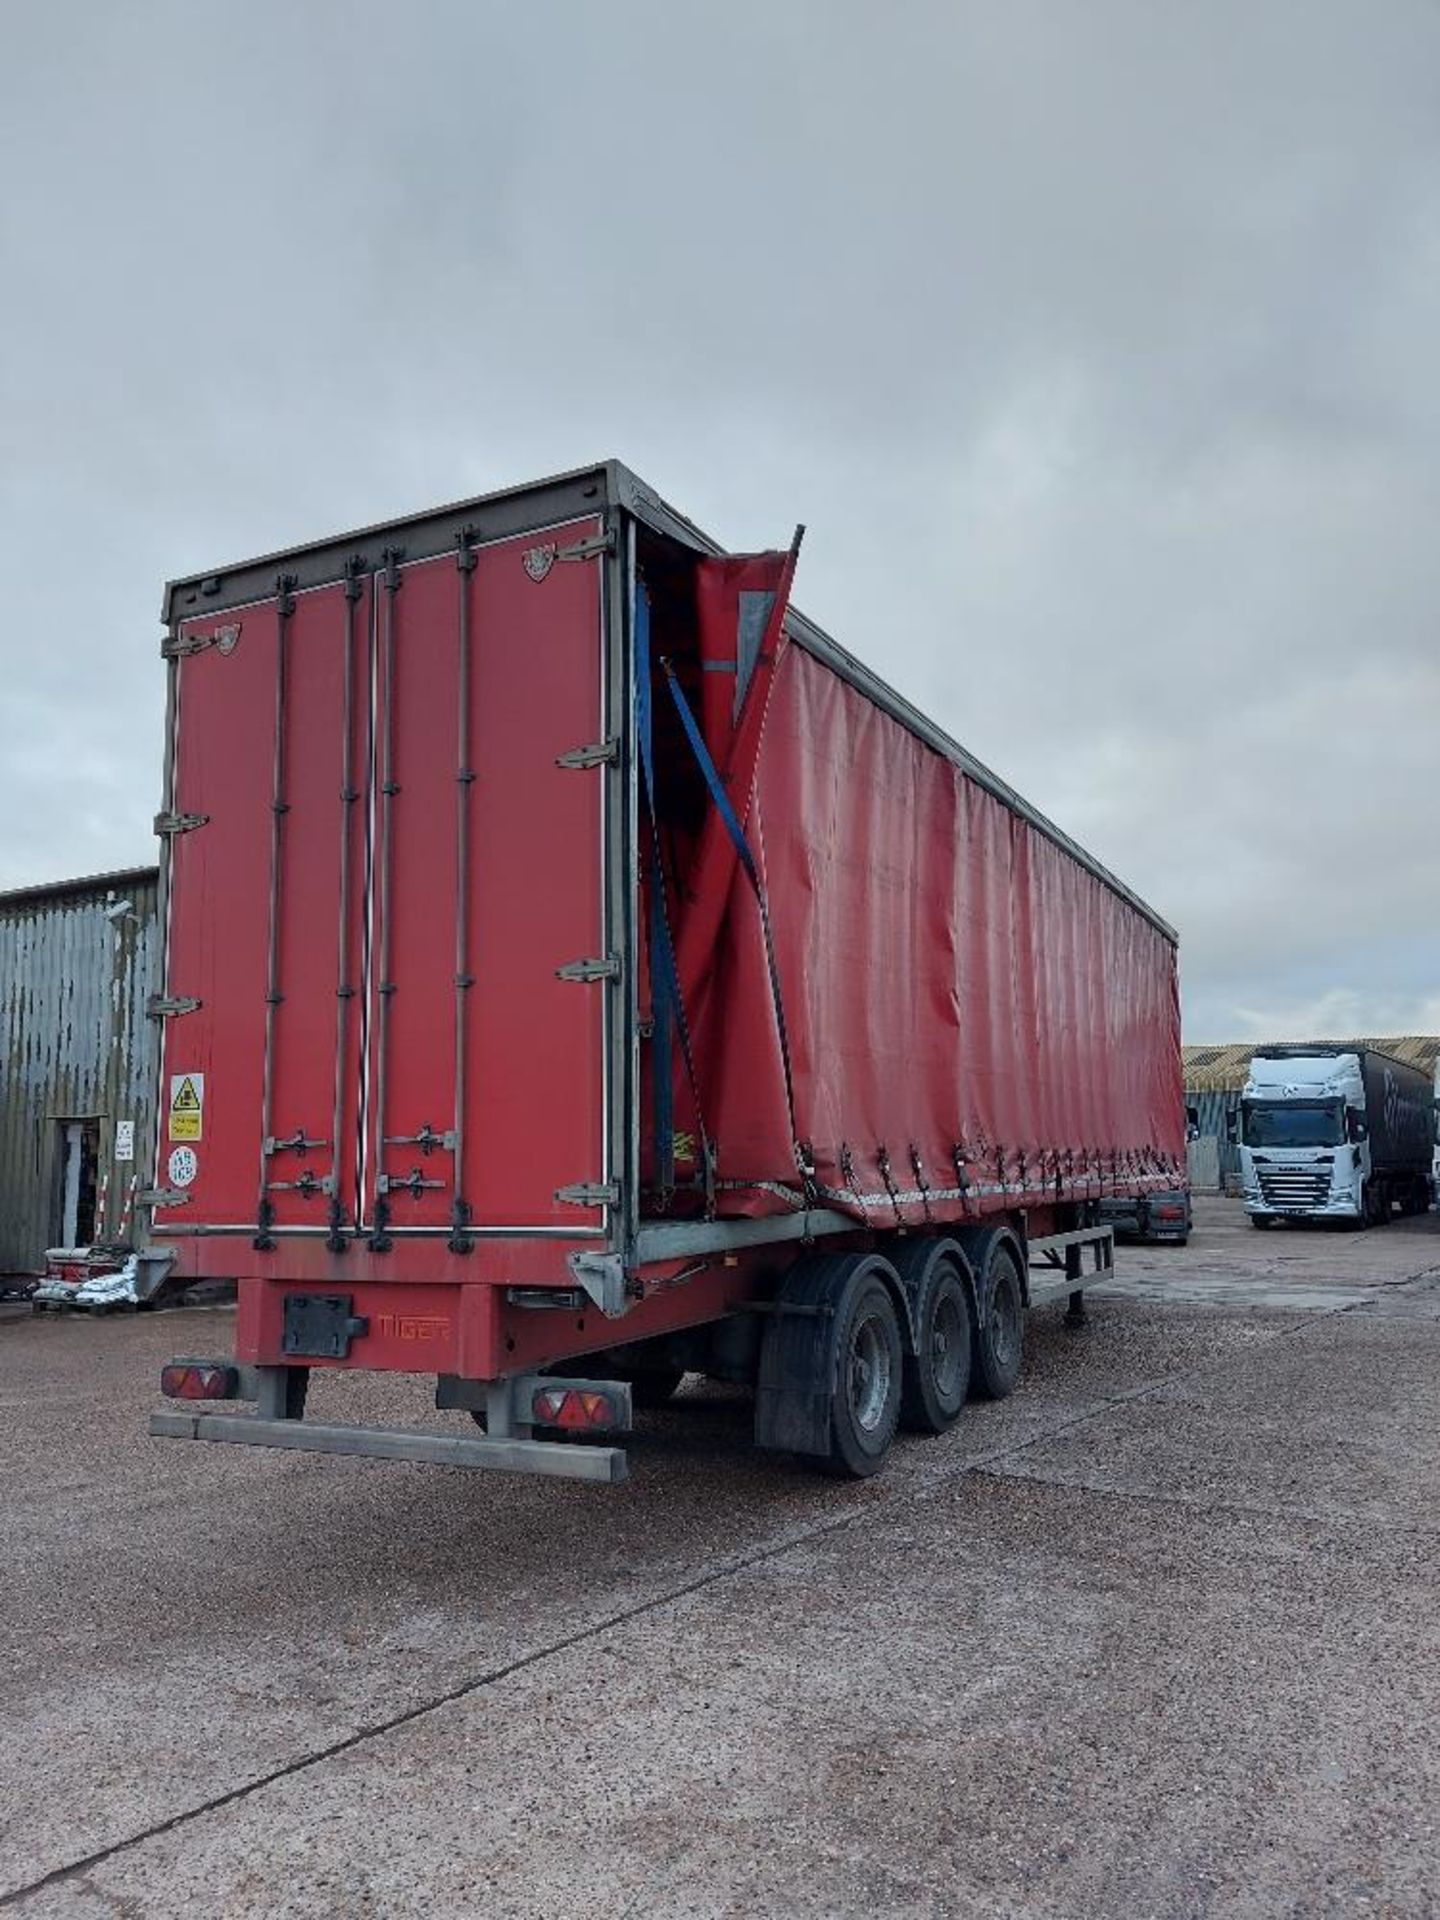 Tiger Tri-Axle 13.7m Curtain Side Trailer Unit - Image 5 of 8